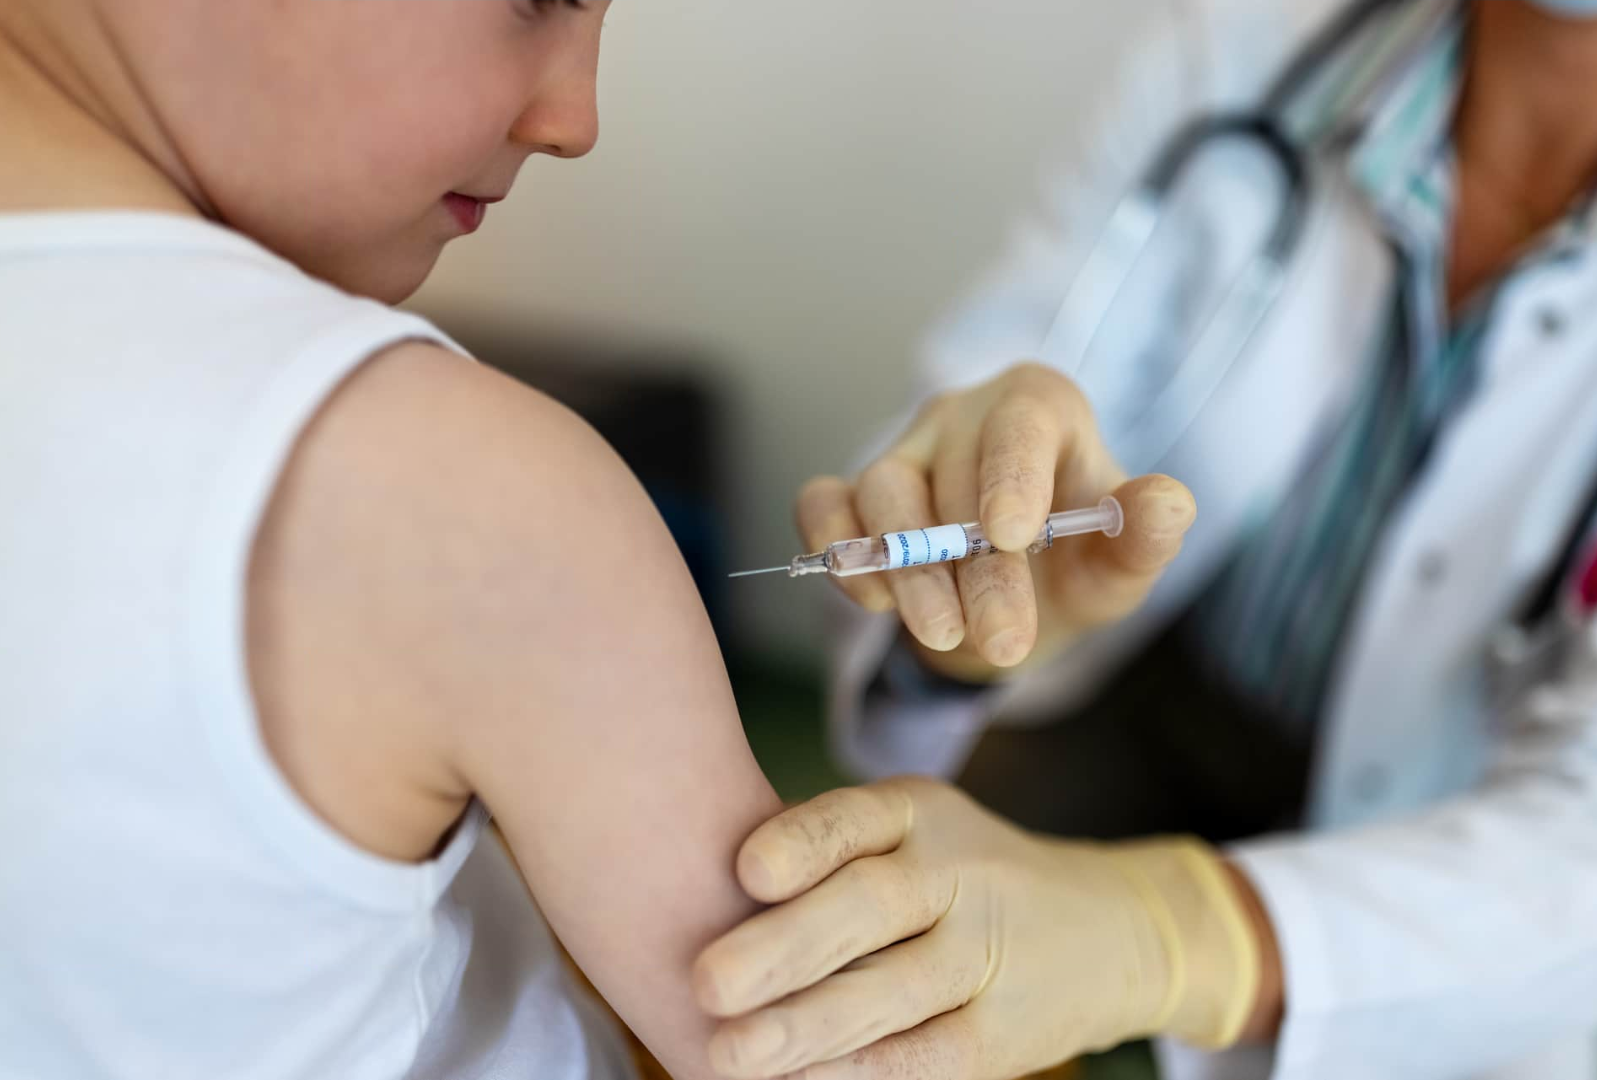 Gov. Pritzker says prepare now to vaccinate kids aged 5 to 11